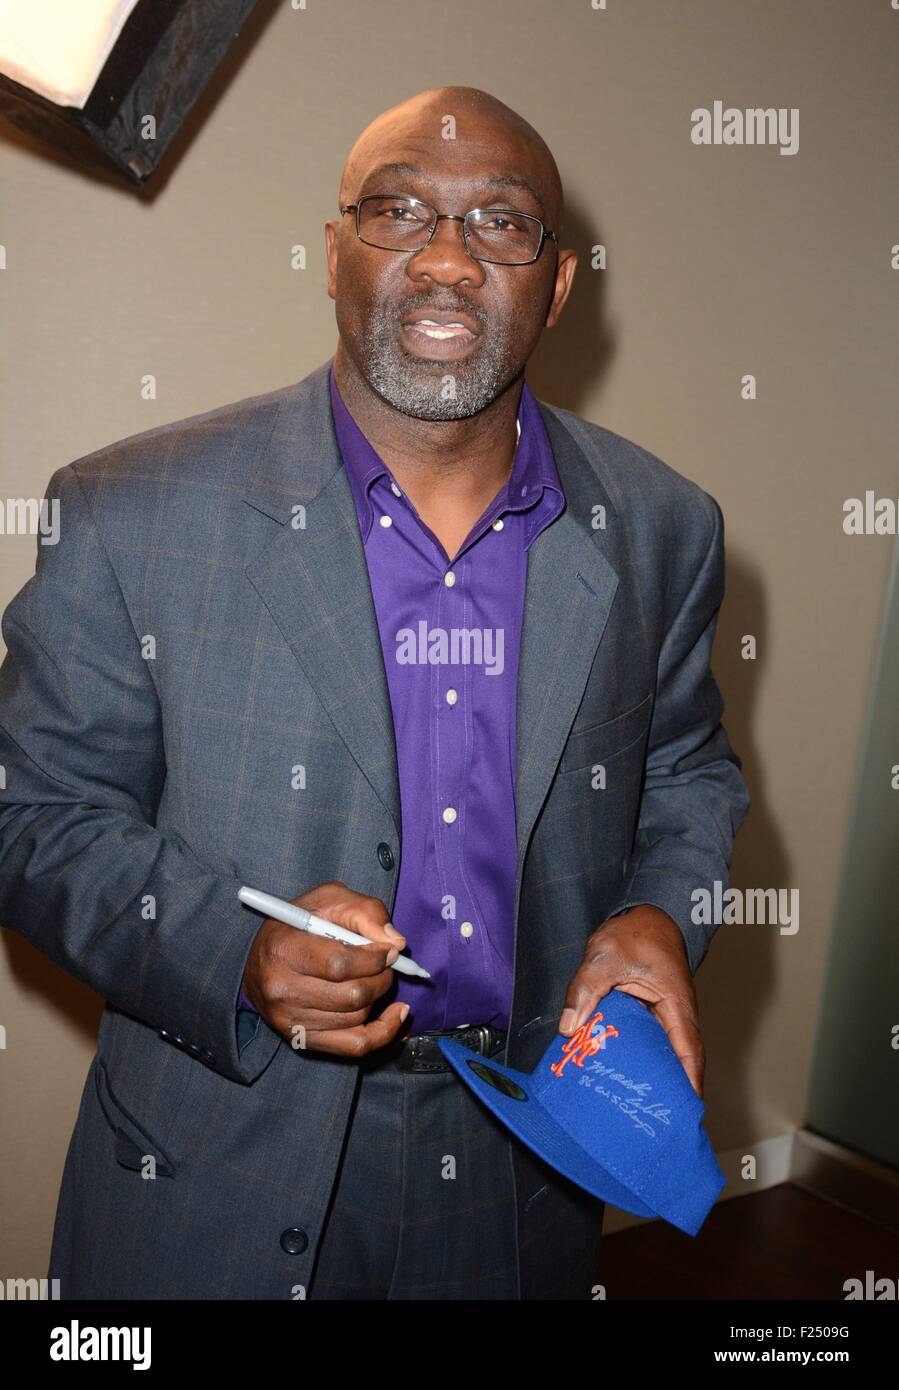 New York, NY, USA. 11th Sep, 2015. Mookie Wilson, NY Mets in attendance for BGC Partners Annual Charity Day, BGC Partners downtown Manhattan, New York, NY September 11, 2015. Credit:  Derek Storm/Everett Collection/Alamy Live News Stock Photo